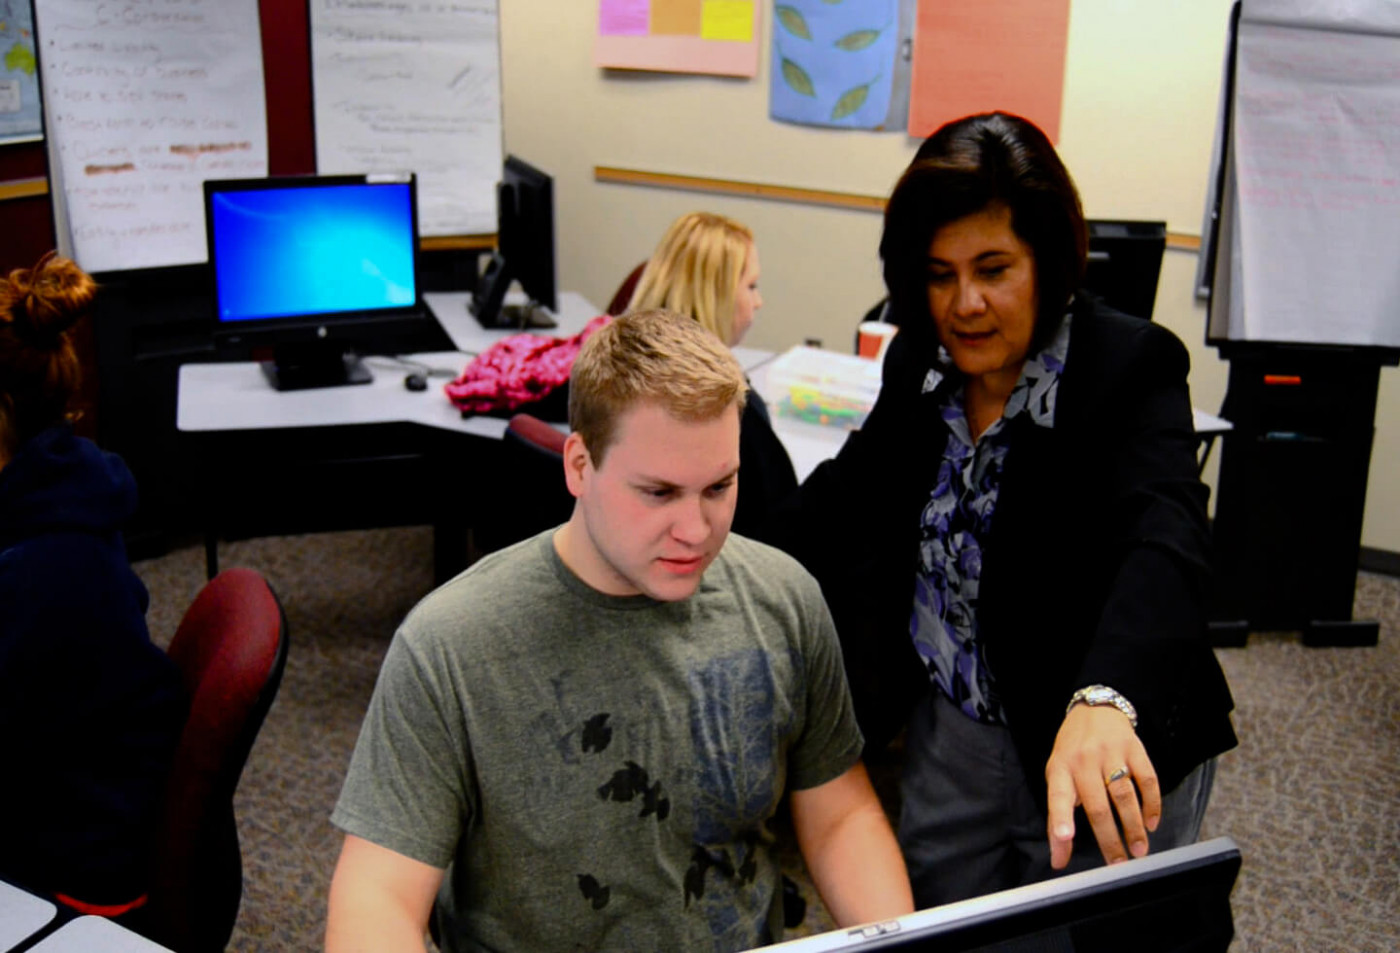 Instructor advising student over computer